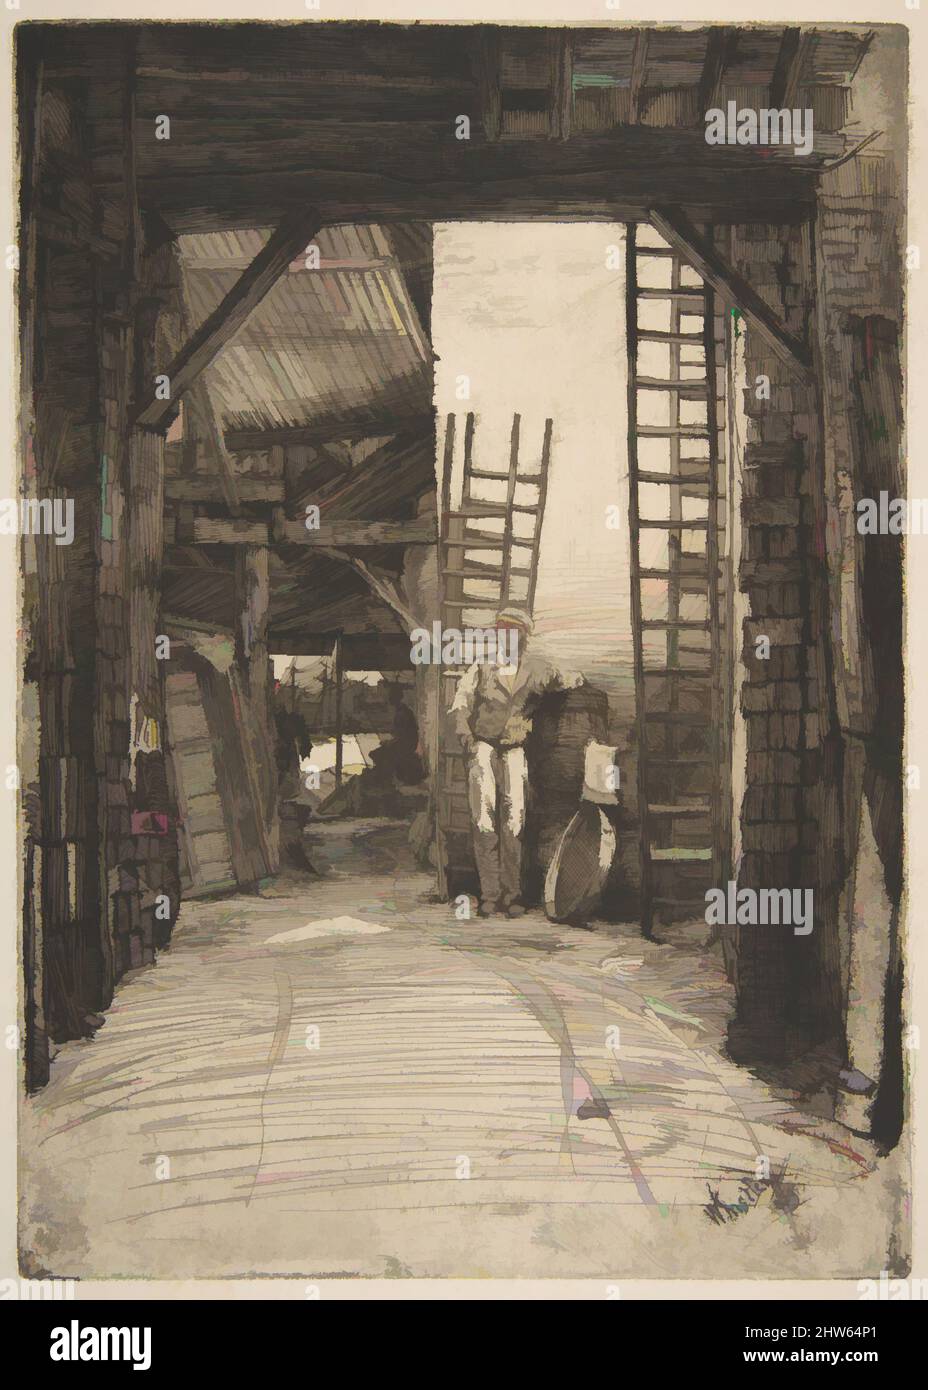 Art inspired by The Lime-Burner (W. Jones, Lime-Burner, Thames Street), 1859, Etching and drypoint; first state of two (Glasgow); warm black ink on ivory wove paper, Plate: 9 3/4 x 7 in. (24.8 x 17.8 cm), Prints, James McNeill Whistler (American, Lowell, Massachusetts 1834–1903 London, Classic works modernized by Artotop with a splash of modernity. Shapes, color and value, eye-catching visual impact on art. Emotions through freedom of artworks in a contemporary way. A timeless message pursuing a wildly creative new direction. Artists turning to the digital medium and creating the Artotop NFT Stock Photo